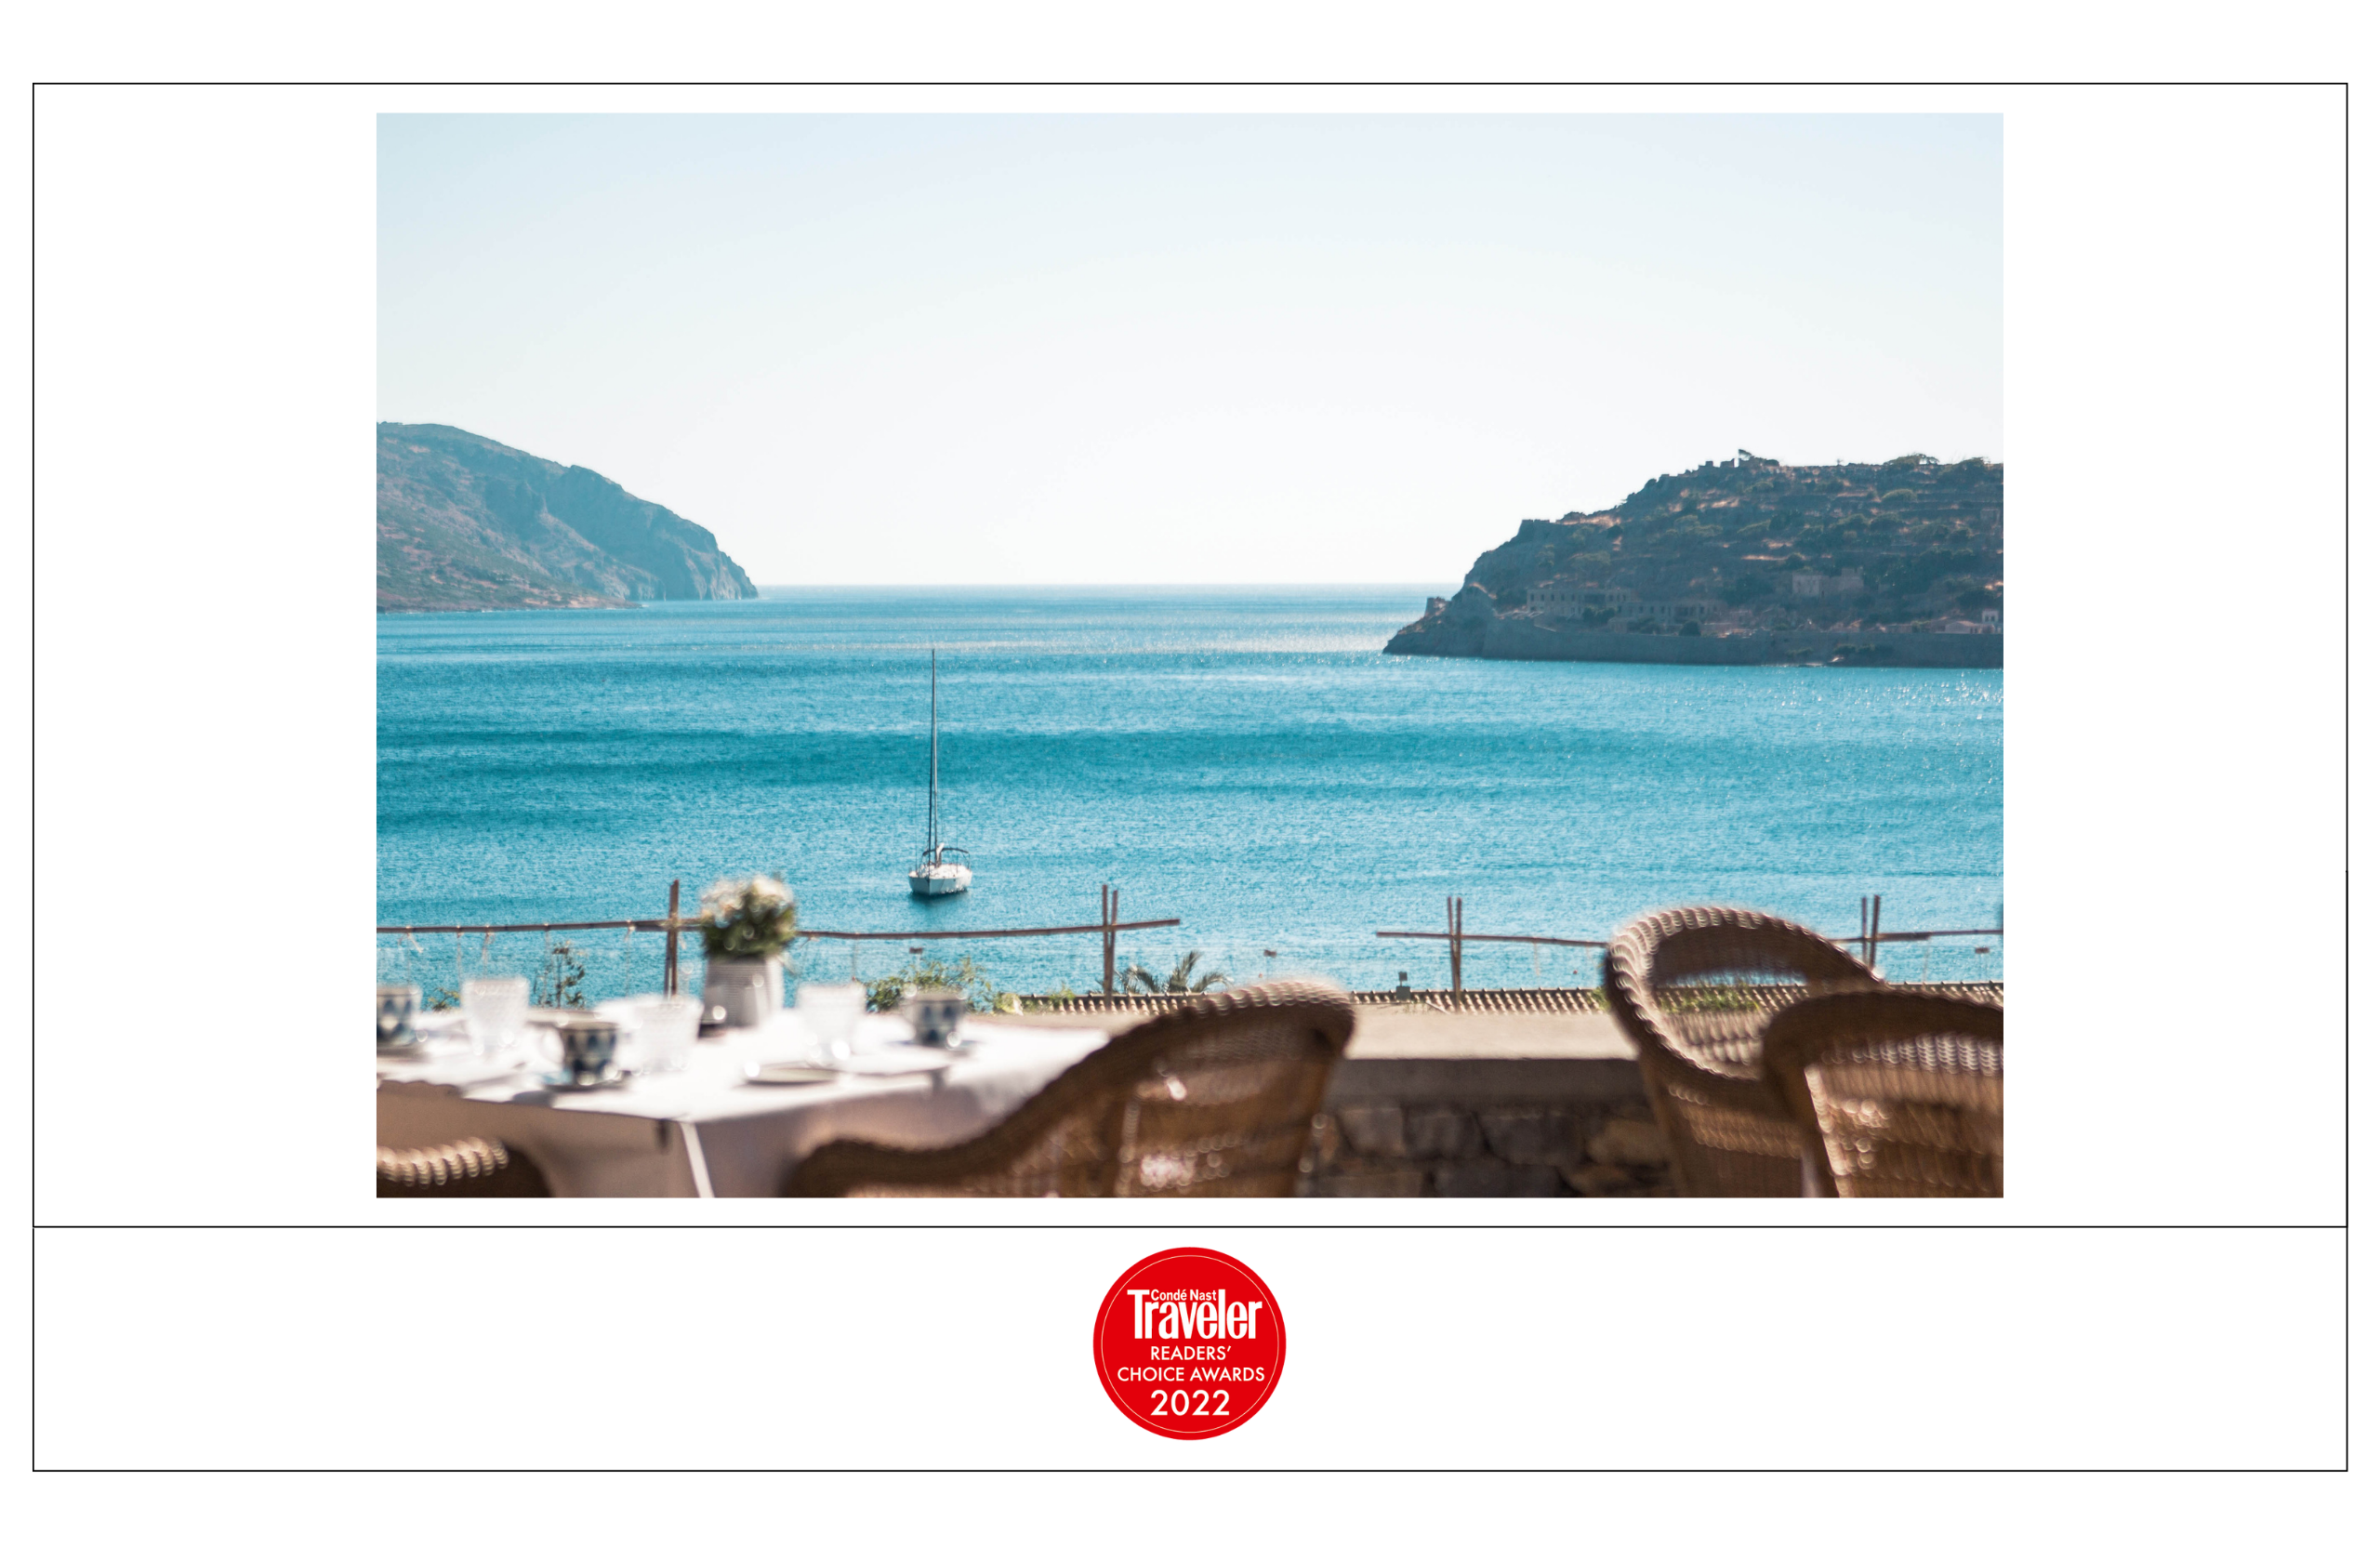 TOP 10 RESORTS IN GREECE READERS’ CHOICE AWARDS BY CONDÉ NAST TRAVELER, 2022